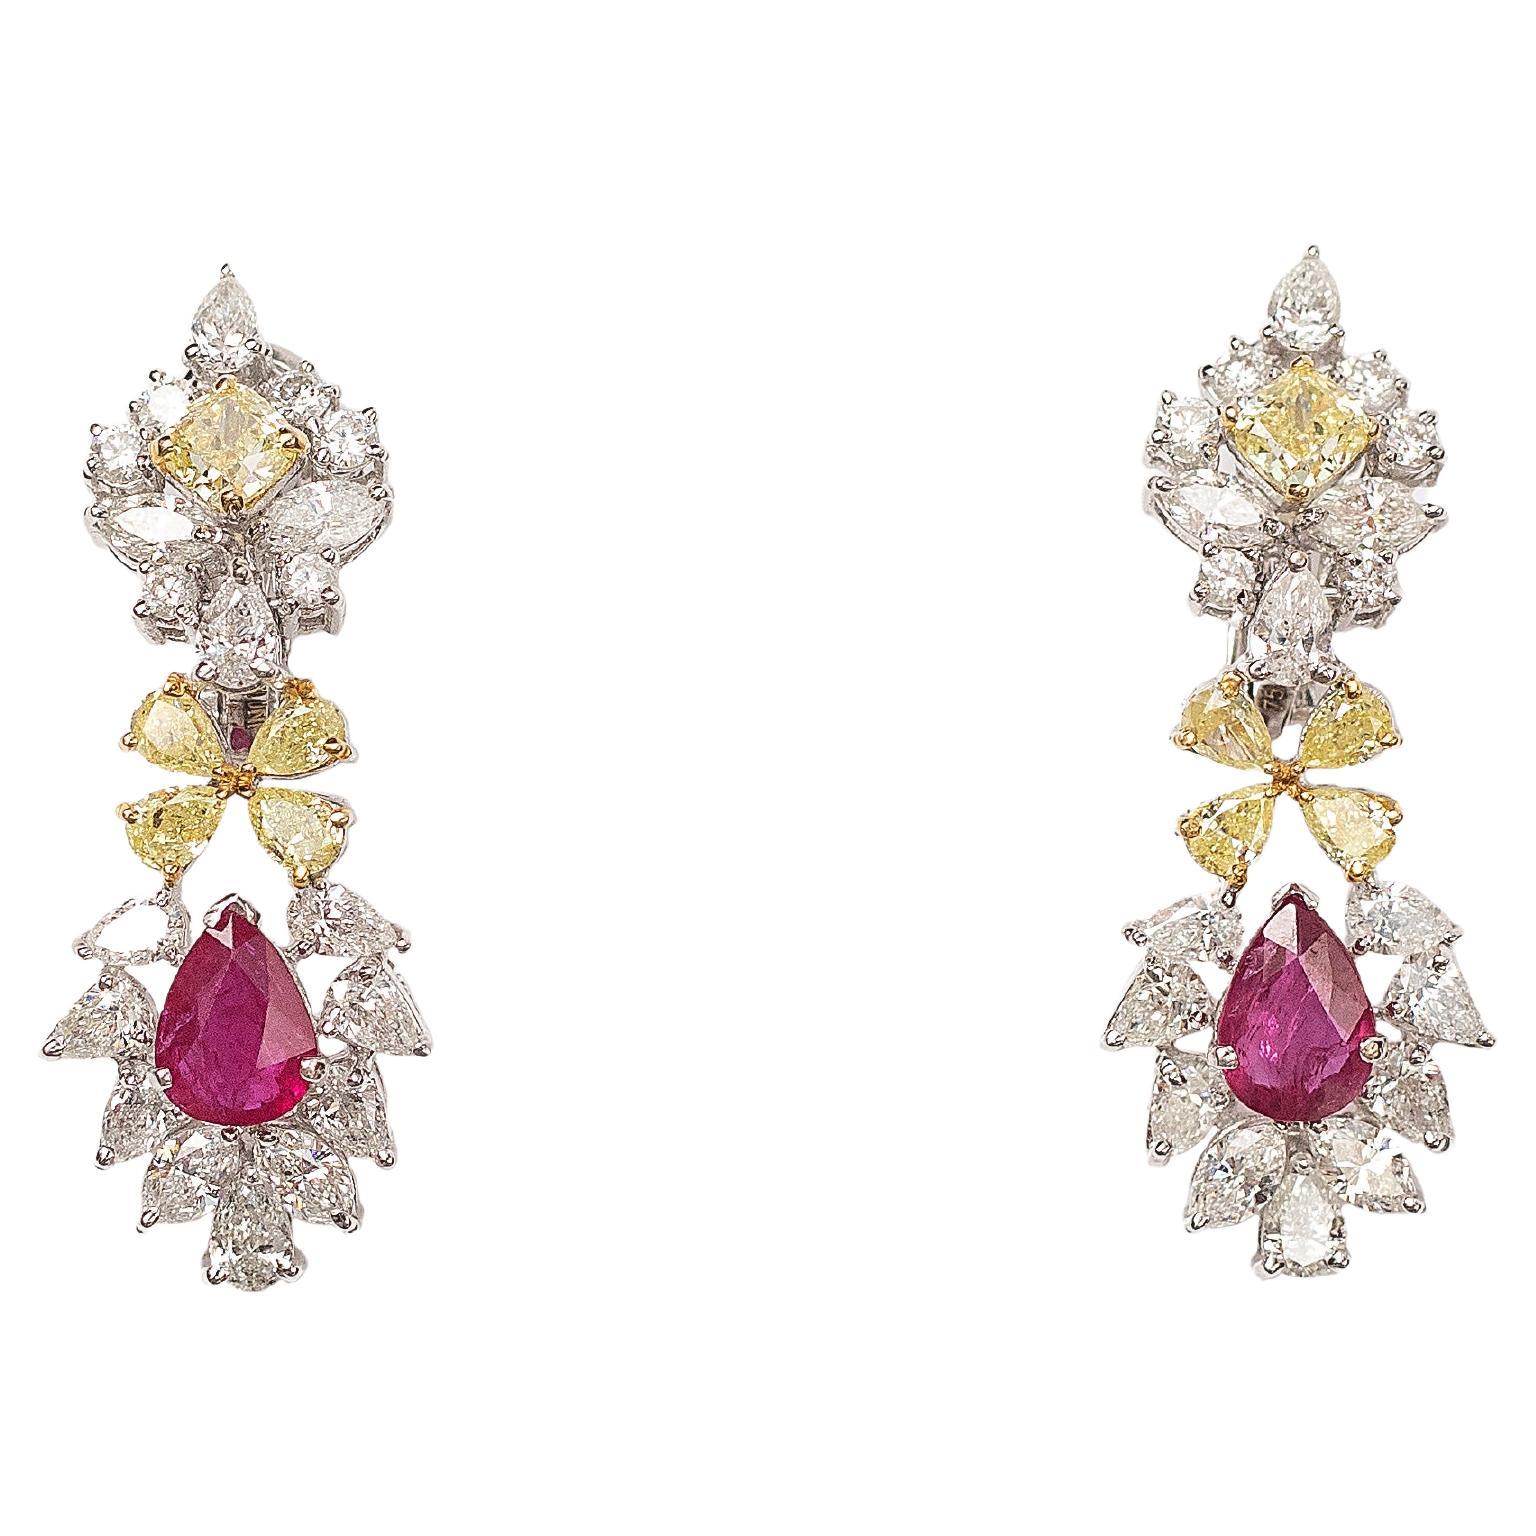 9.89 cts Fancy Yellow and White Diamonds and Natural Ruby Earrings in 18K Gold For Sale